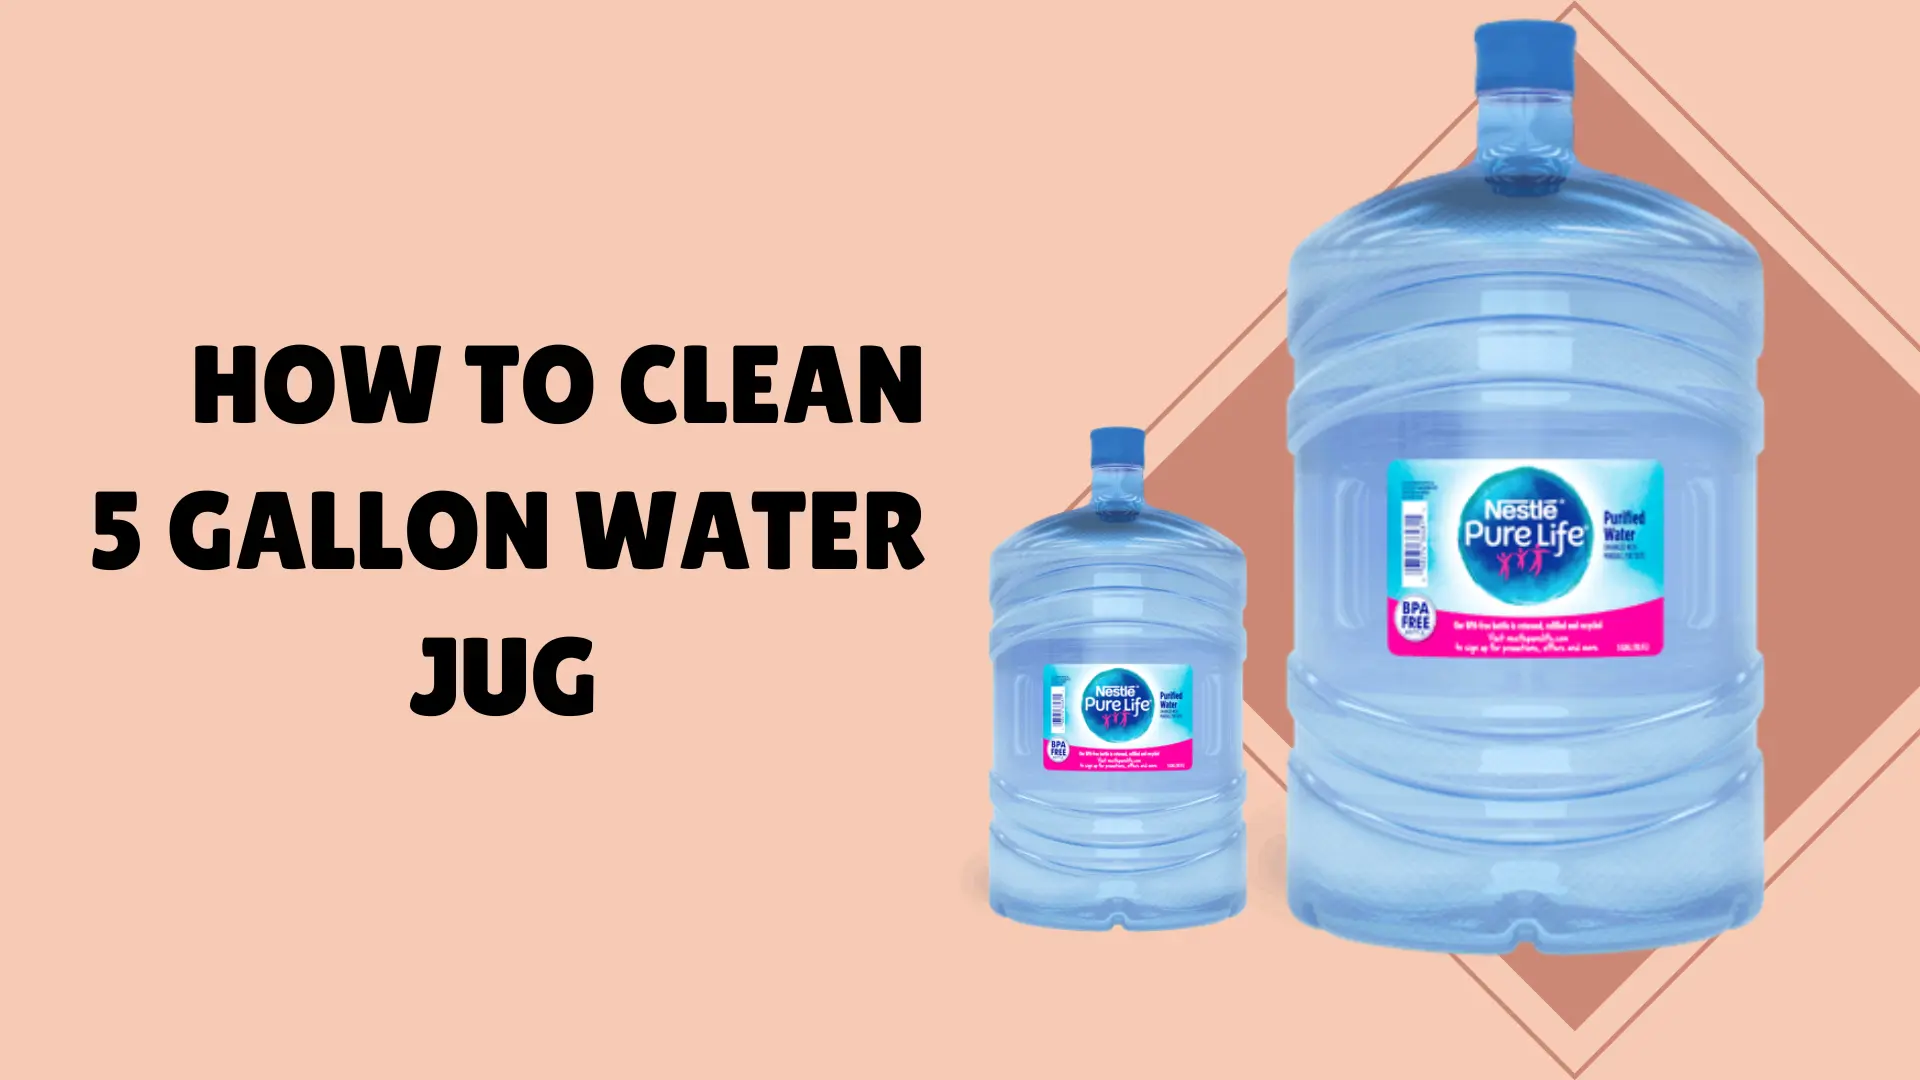 How To Clean 5 Gallon Water Jug In 6 Easy Steps